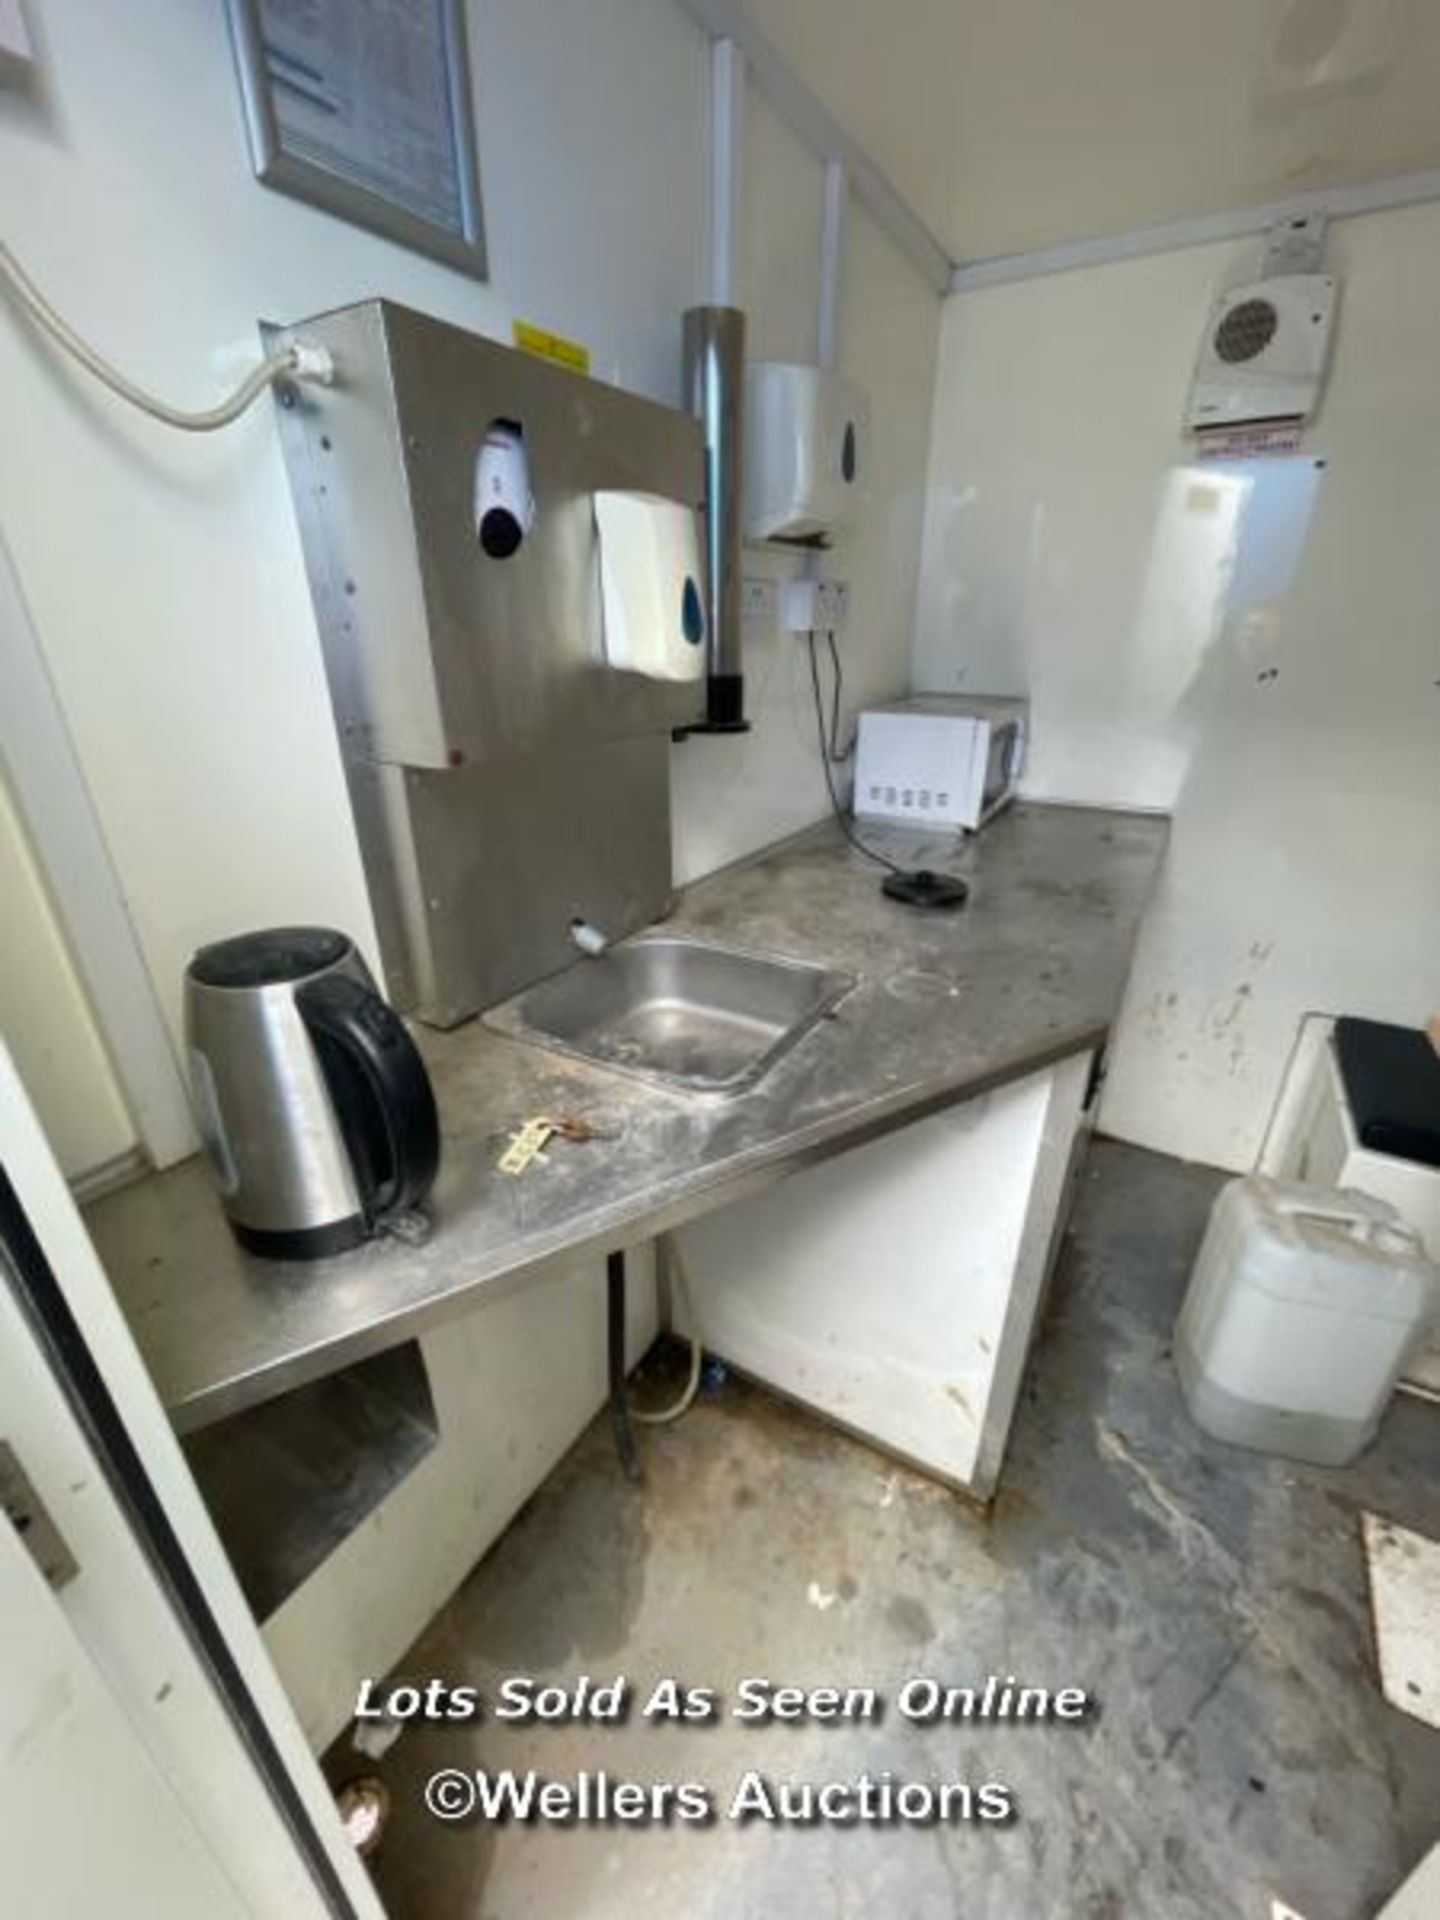 6 PERSON 12 X 7.5FT AJC EASY CABIN TOWABLE WELFARE UNIT, INCLUDES WASH BASIN, KETTLE, MICROWAVE, - Image 8 of 18